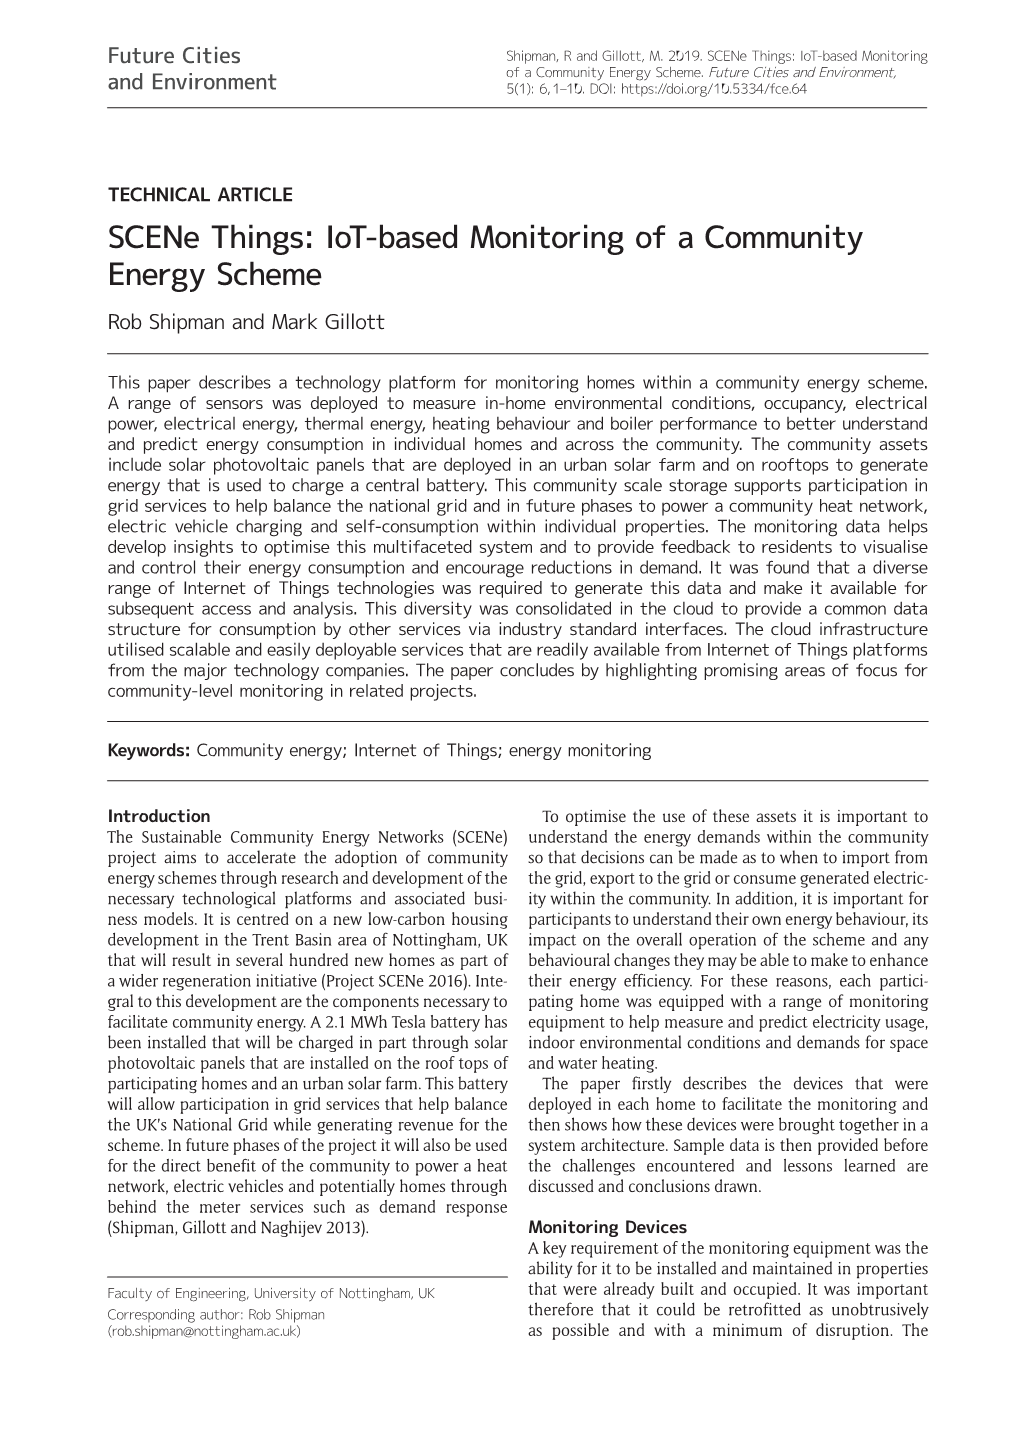 Iot-Based Monitoring of a Community Energy Scheme